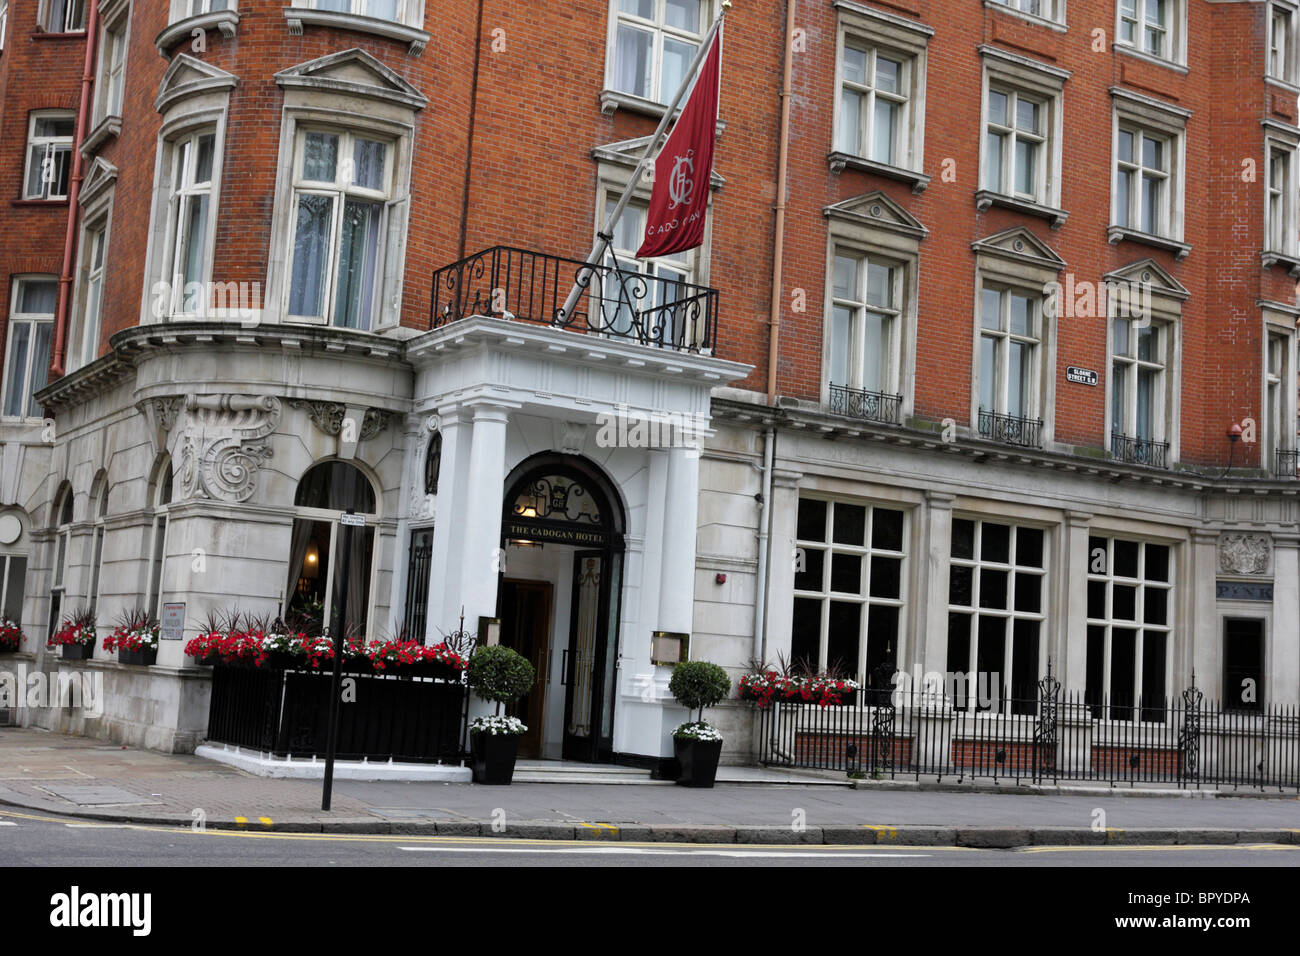 Hotel The Cadogan London, United Kingdom - book now, 2023 prices